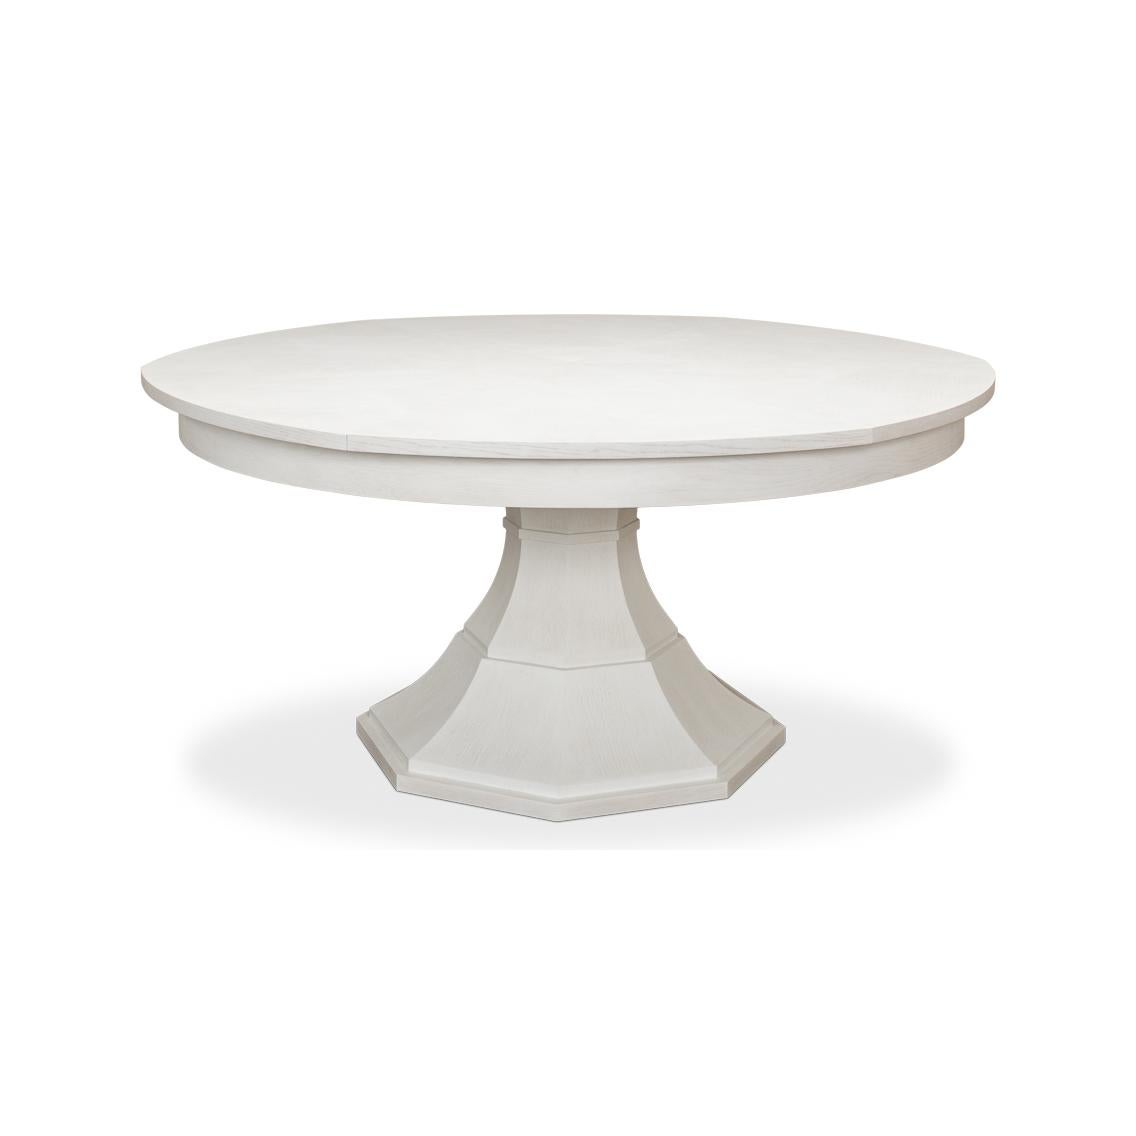 Modern round white painted oak veneered extension Jupe Dining Table with self-storing leaves, on a tapered column form pedestal base.
Open dimensions: 84